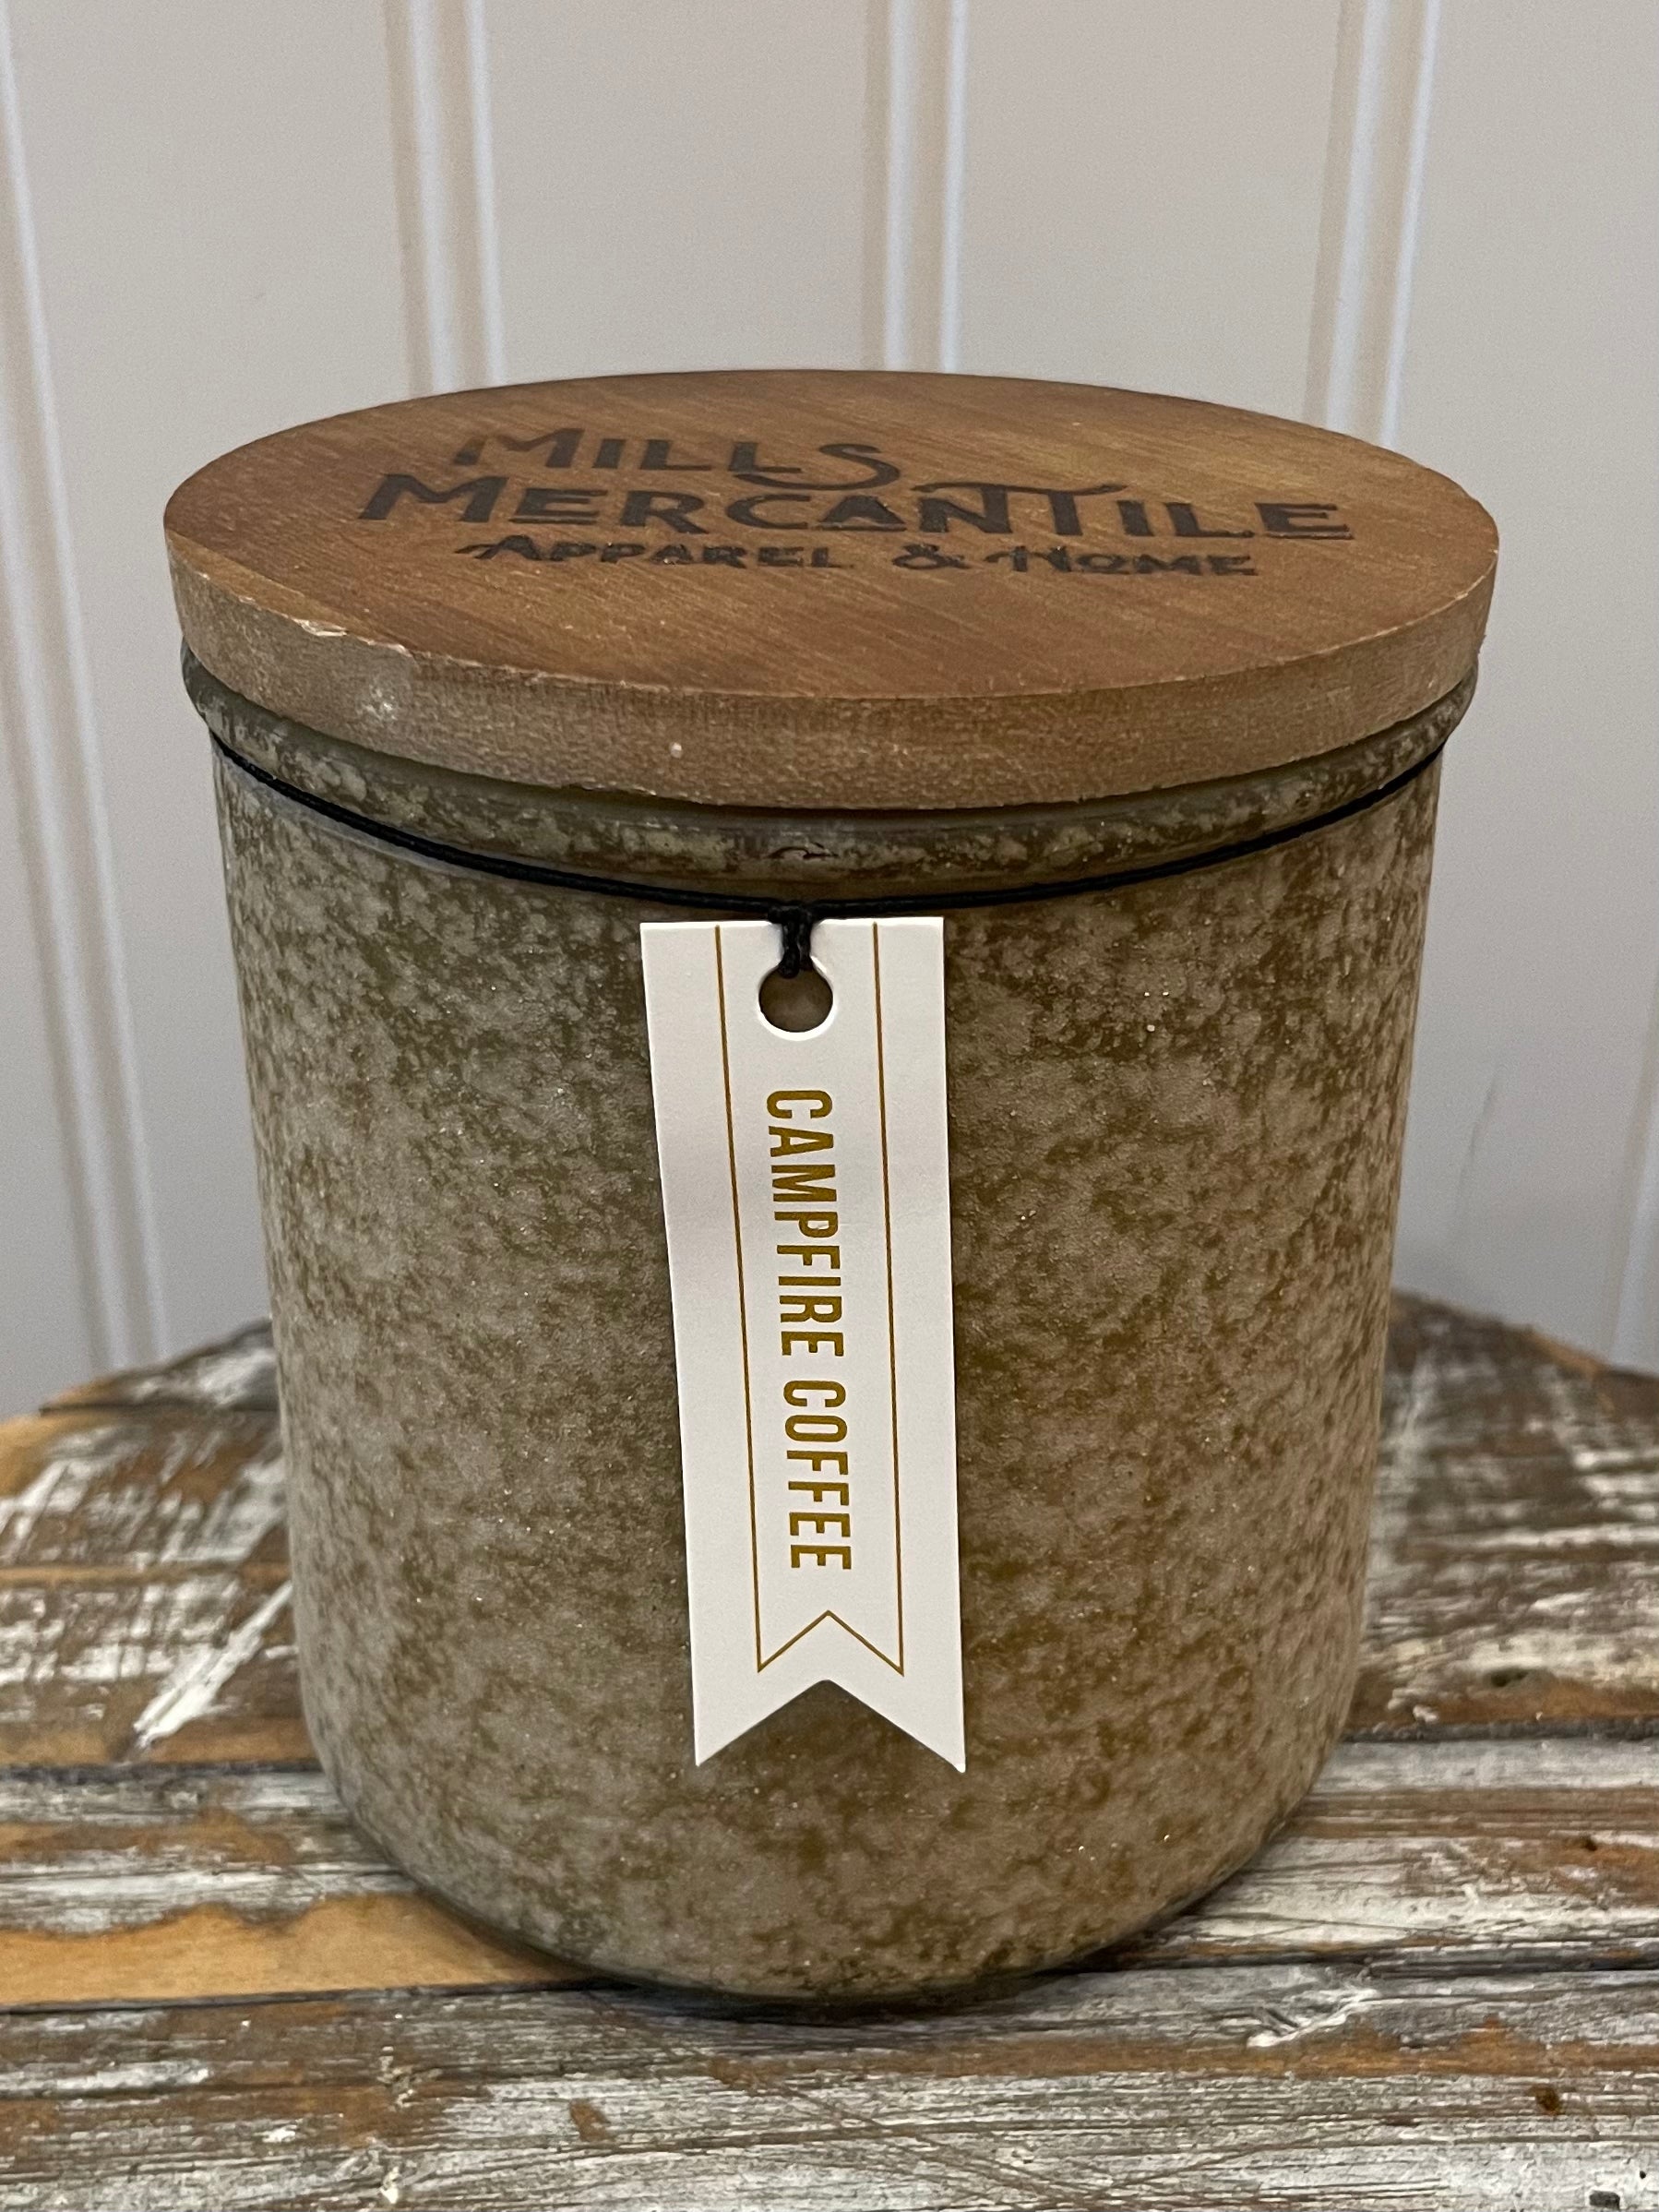 Campfire Coffee Scent - Mills Mercantile Candle